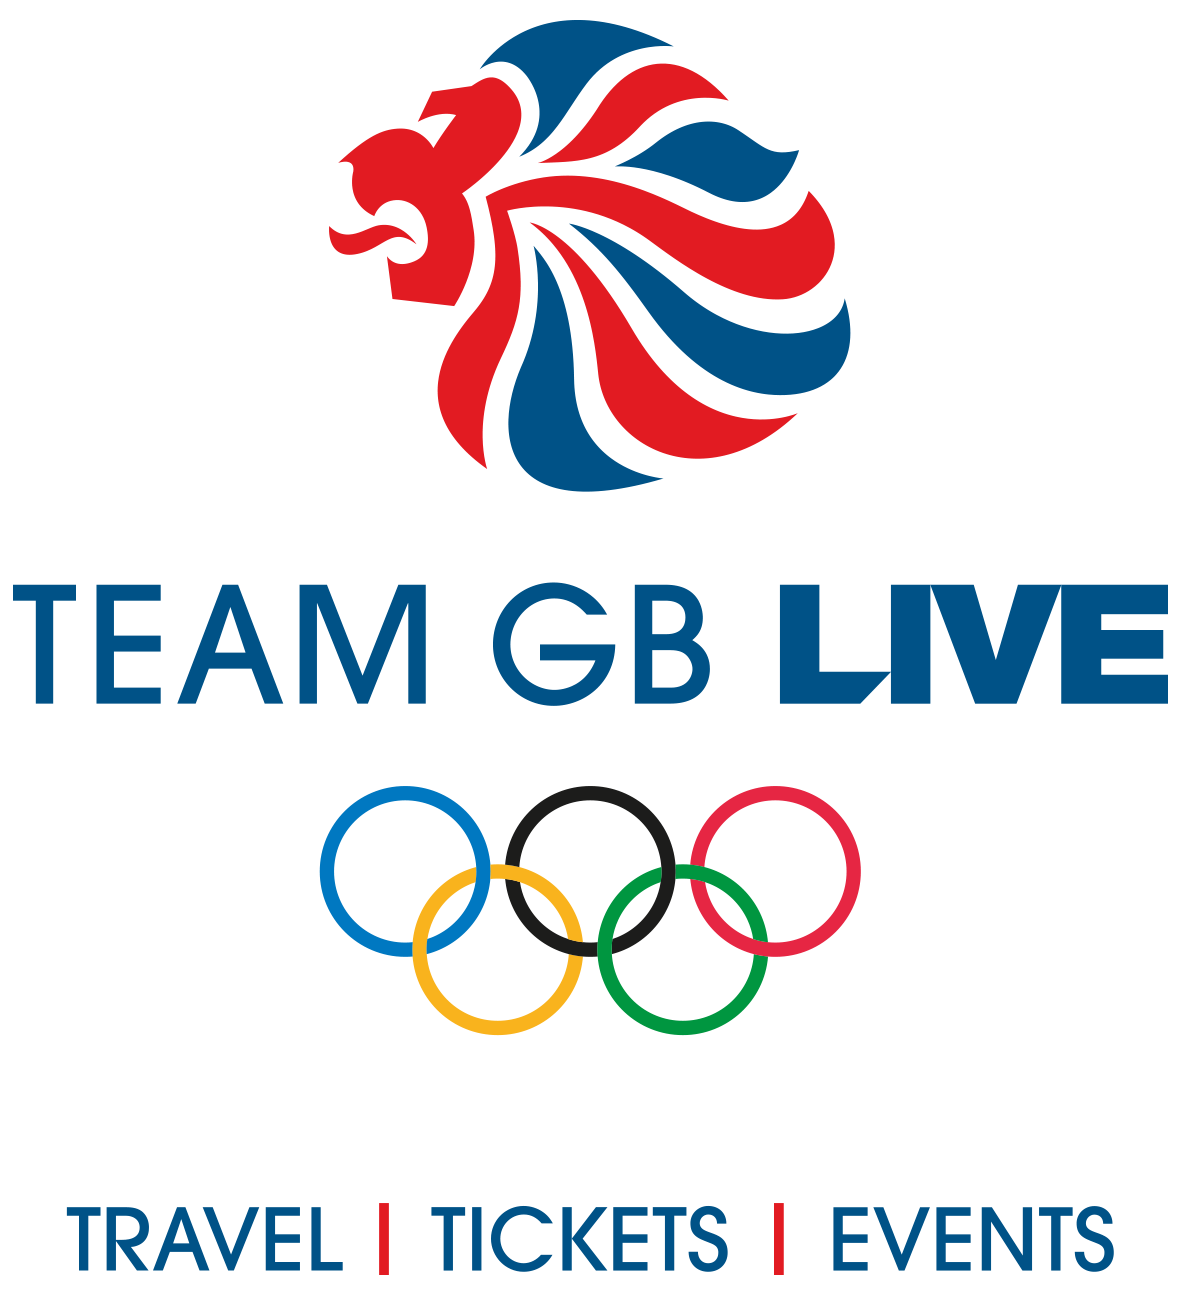 Team GB Live has offered refunds or rollovers to customers in response to the virus ©Team GB Live